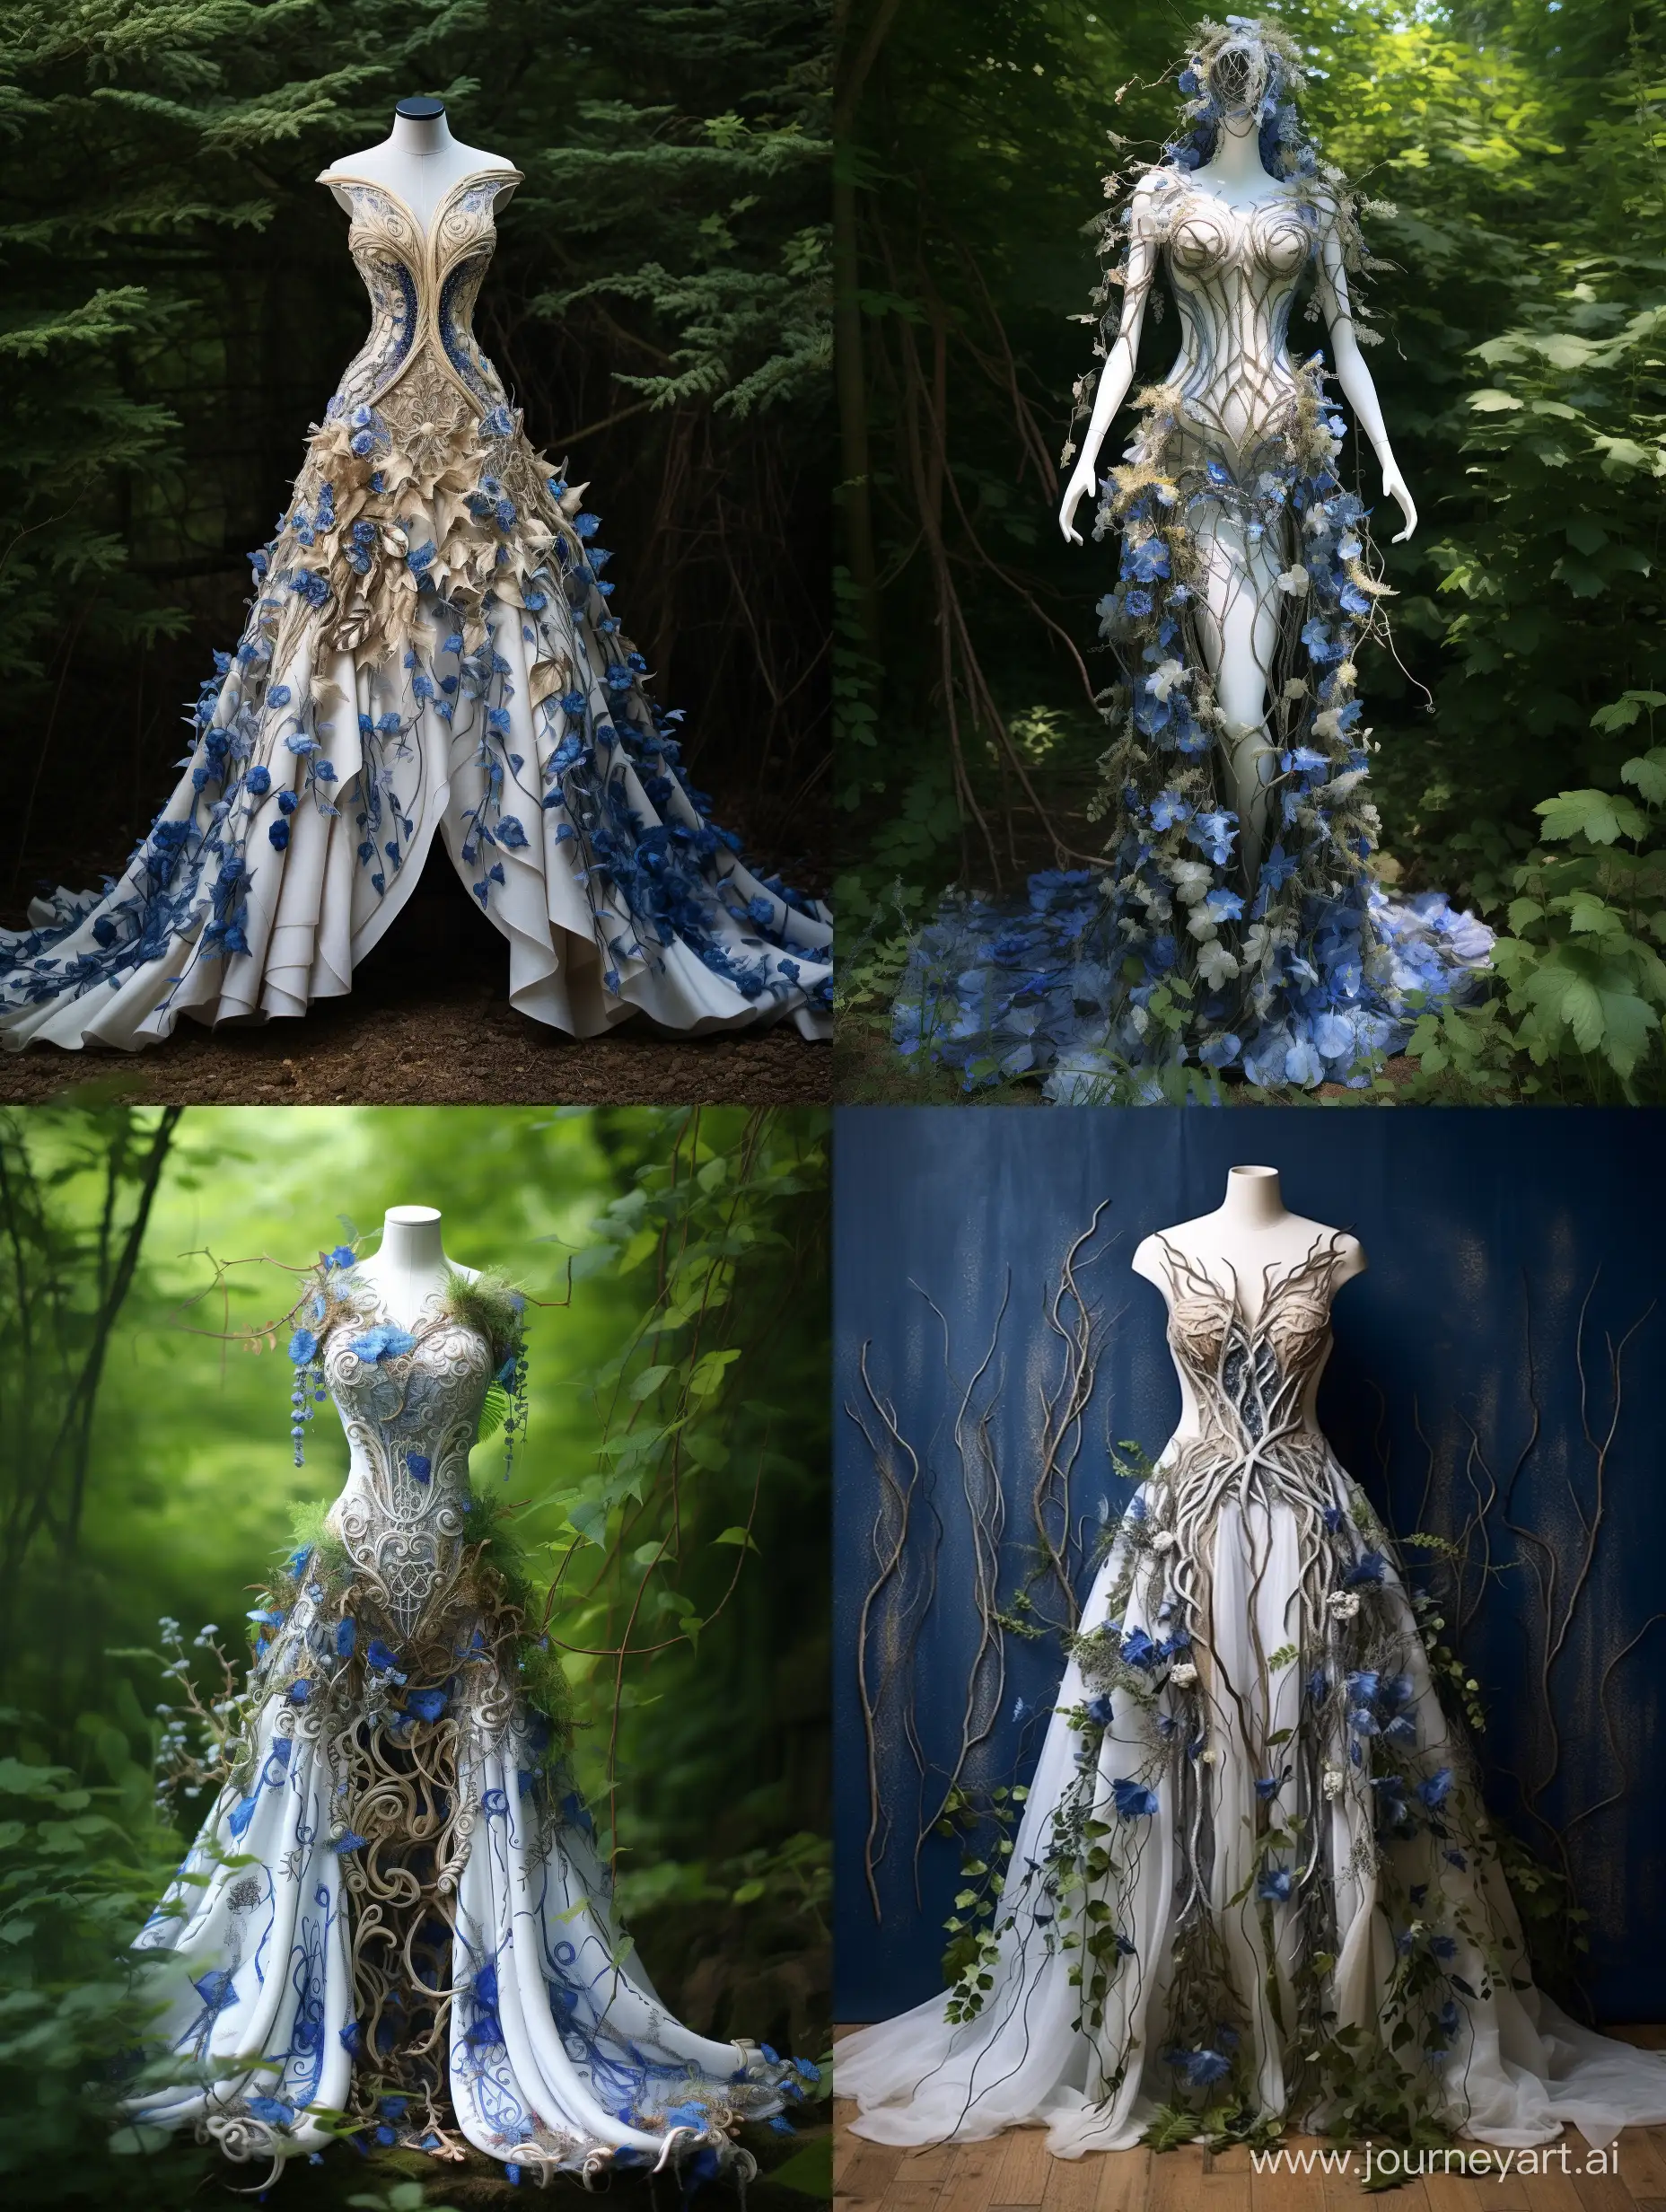 Enchanting-Fantasy-Celtic-Style-Dress-with-Blue-Leaves-and-White-Wood